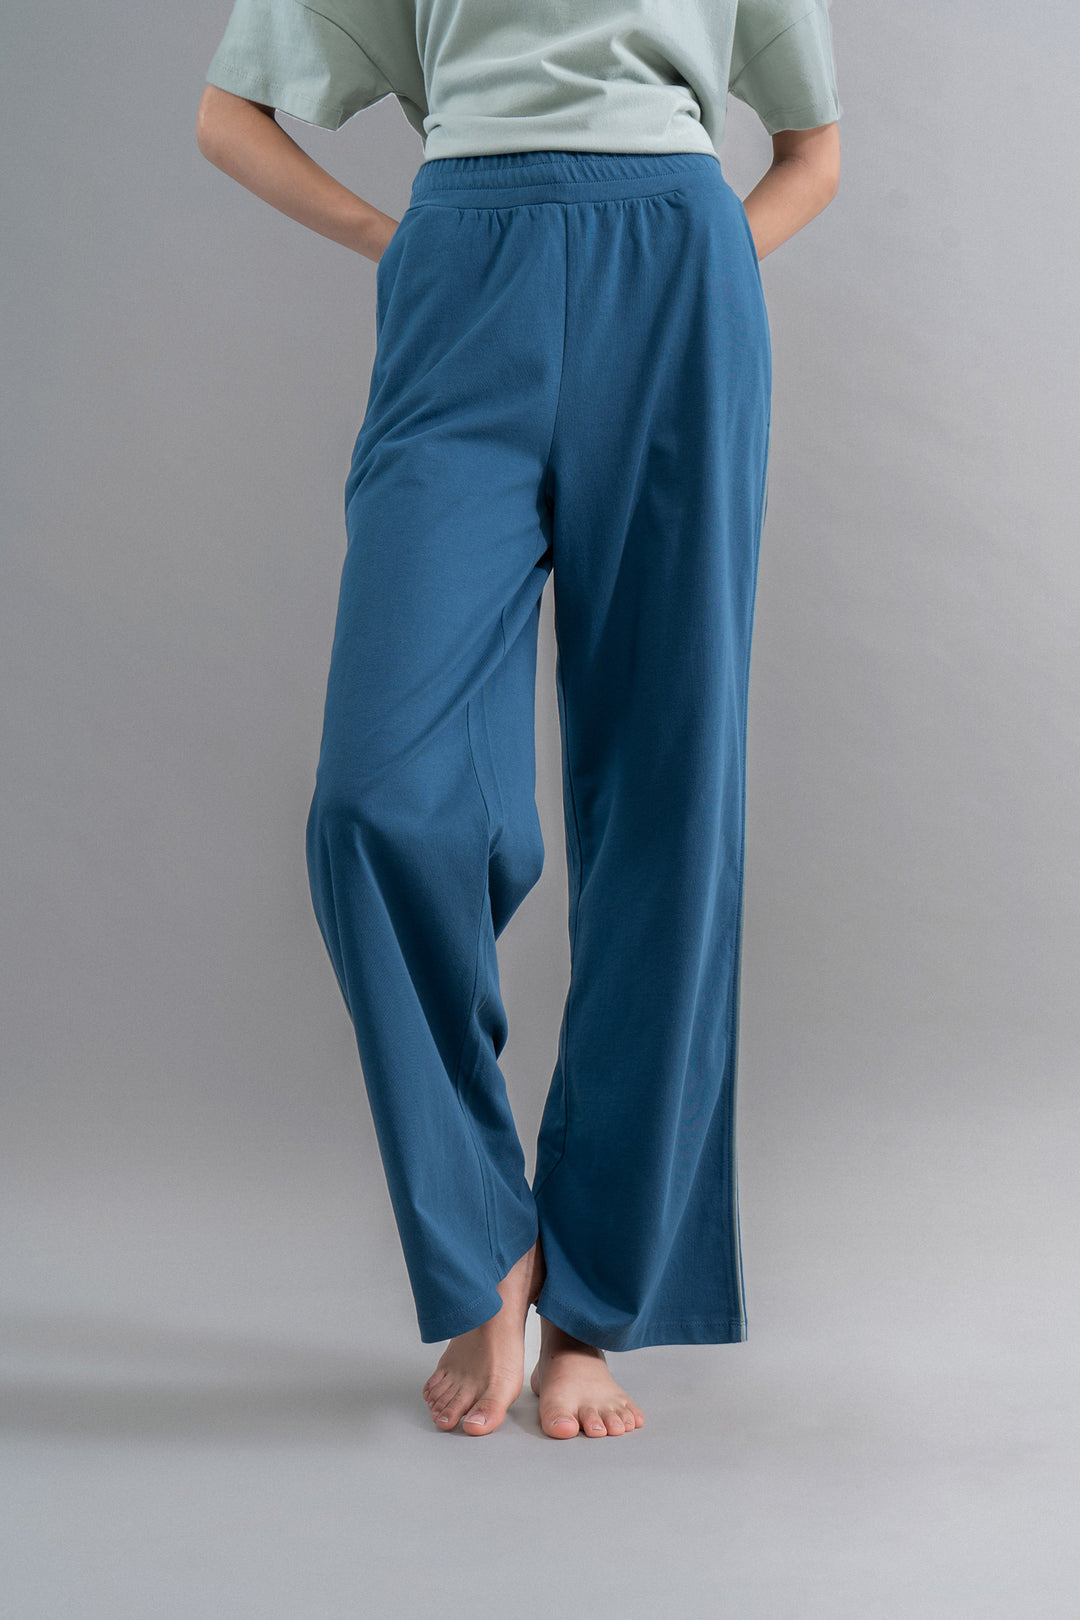 Sage Teal Cotton Lounge Pant With Contrast Piping